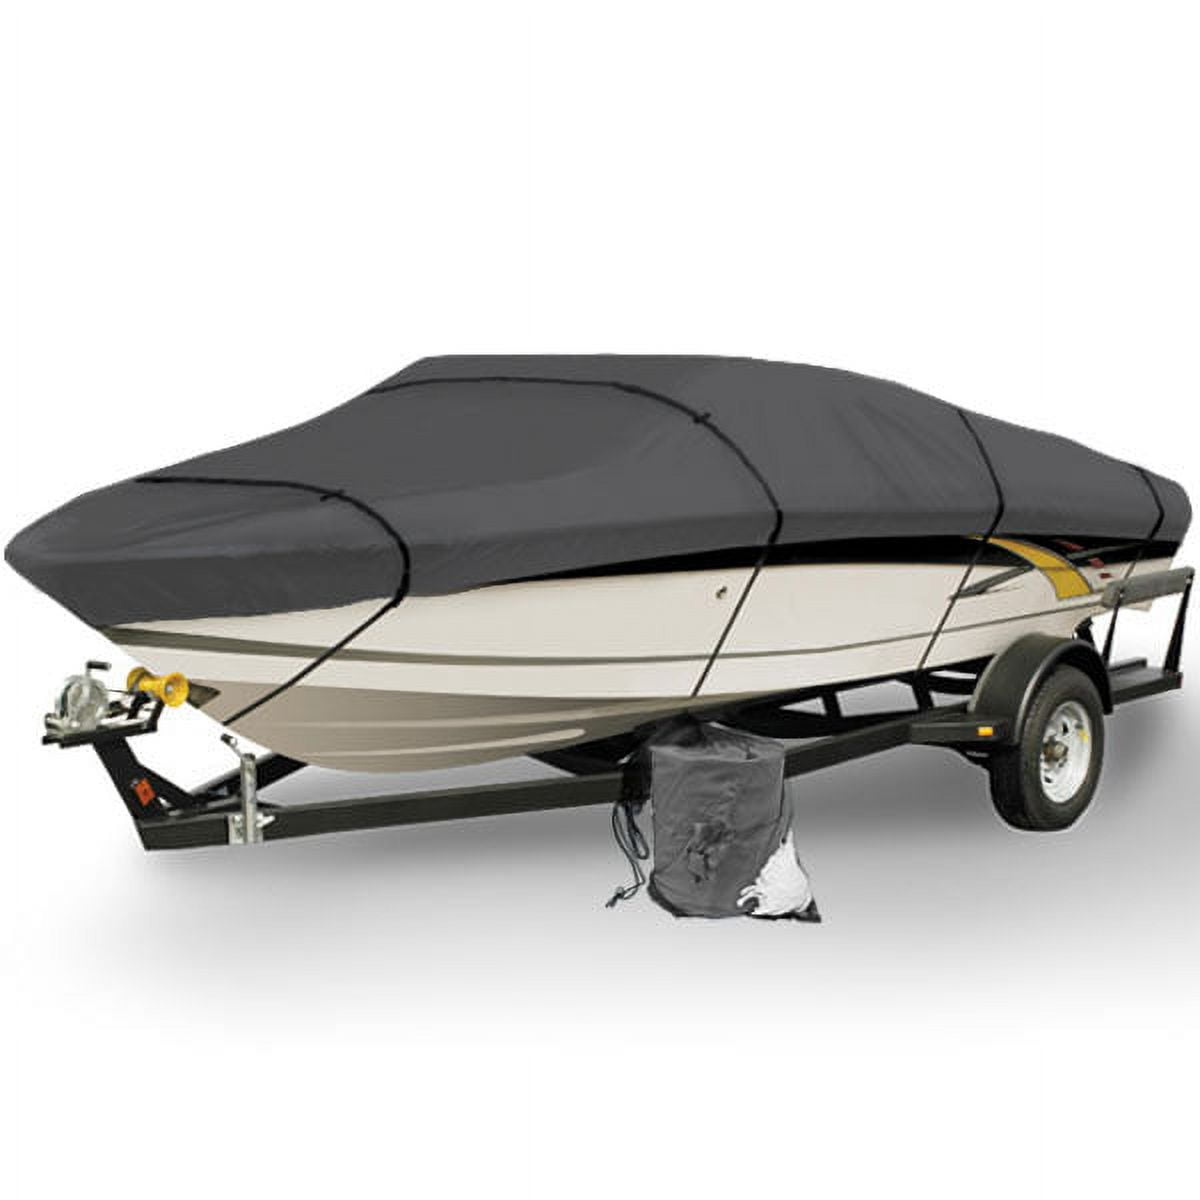 Tiagra 80W Covers - boat parts - by owner - marine sale - craigslist